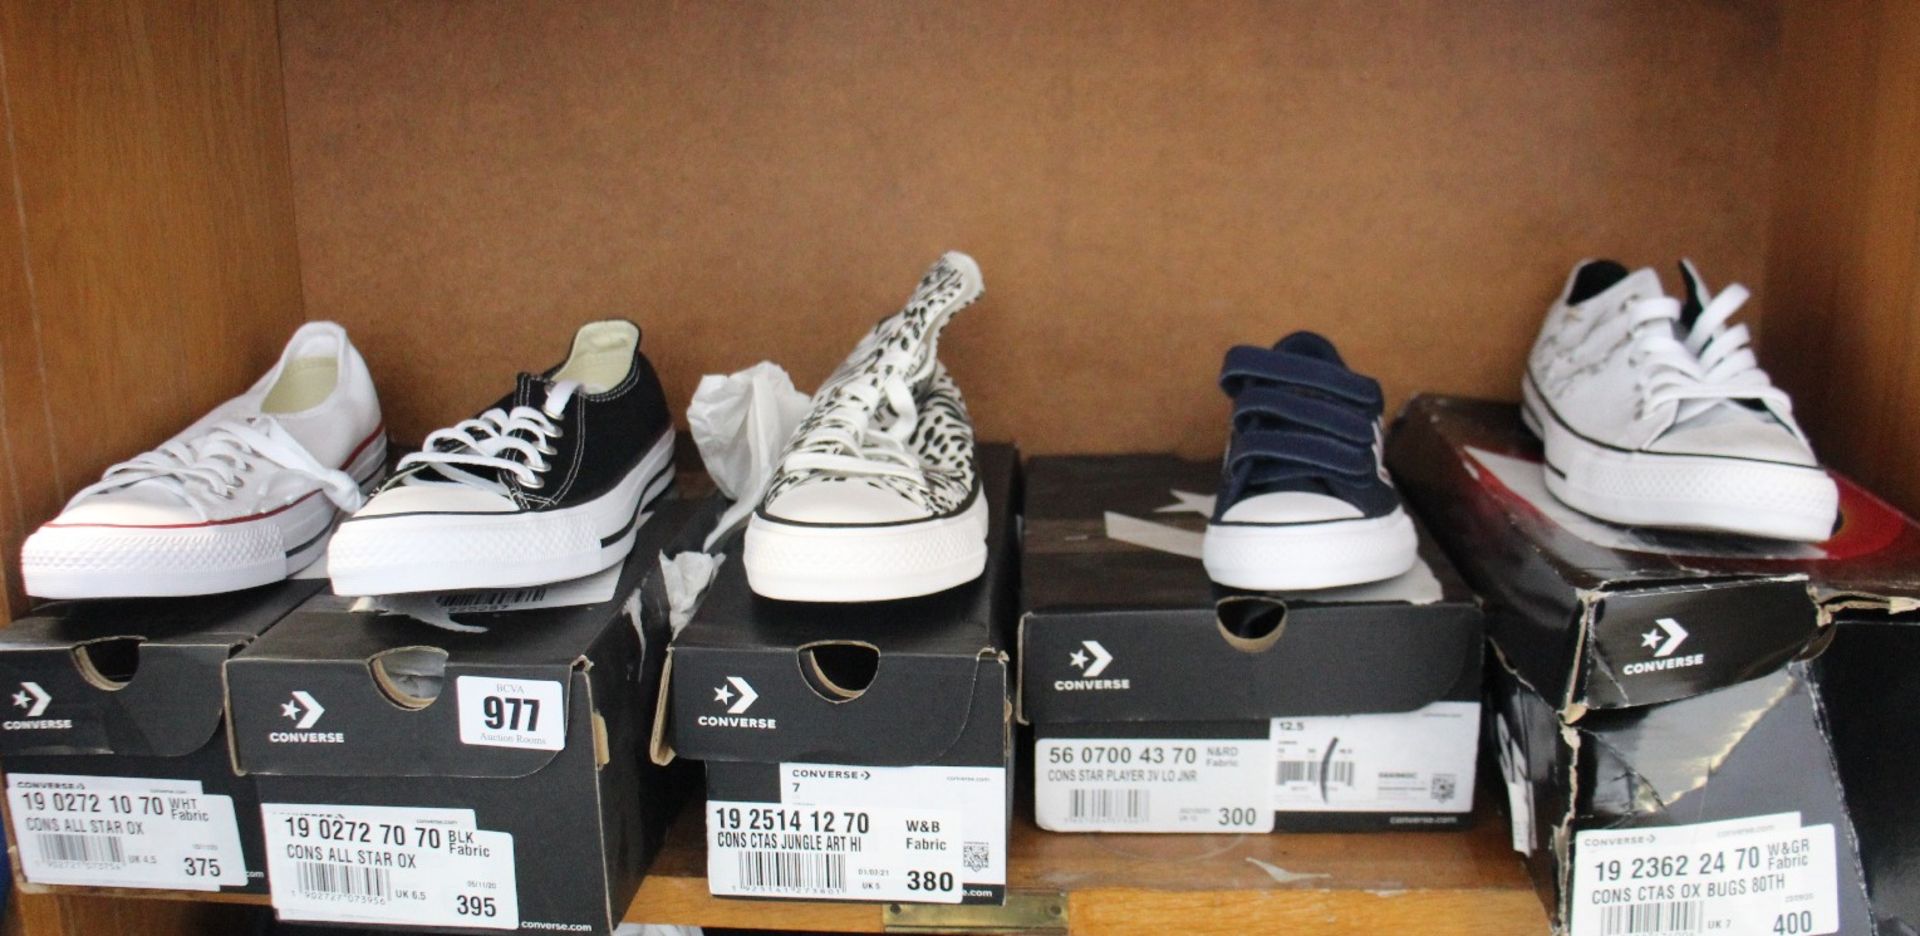 Five pairs of as new Converse canvas footwear.